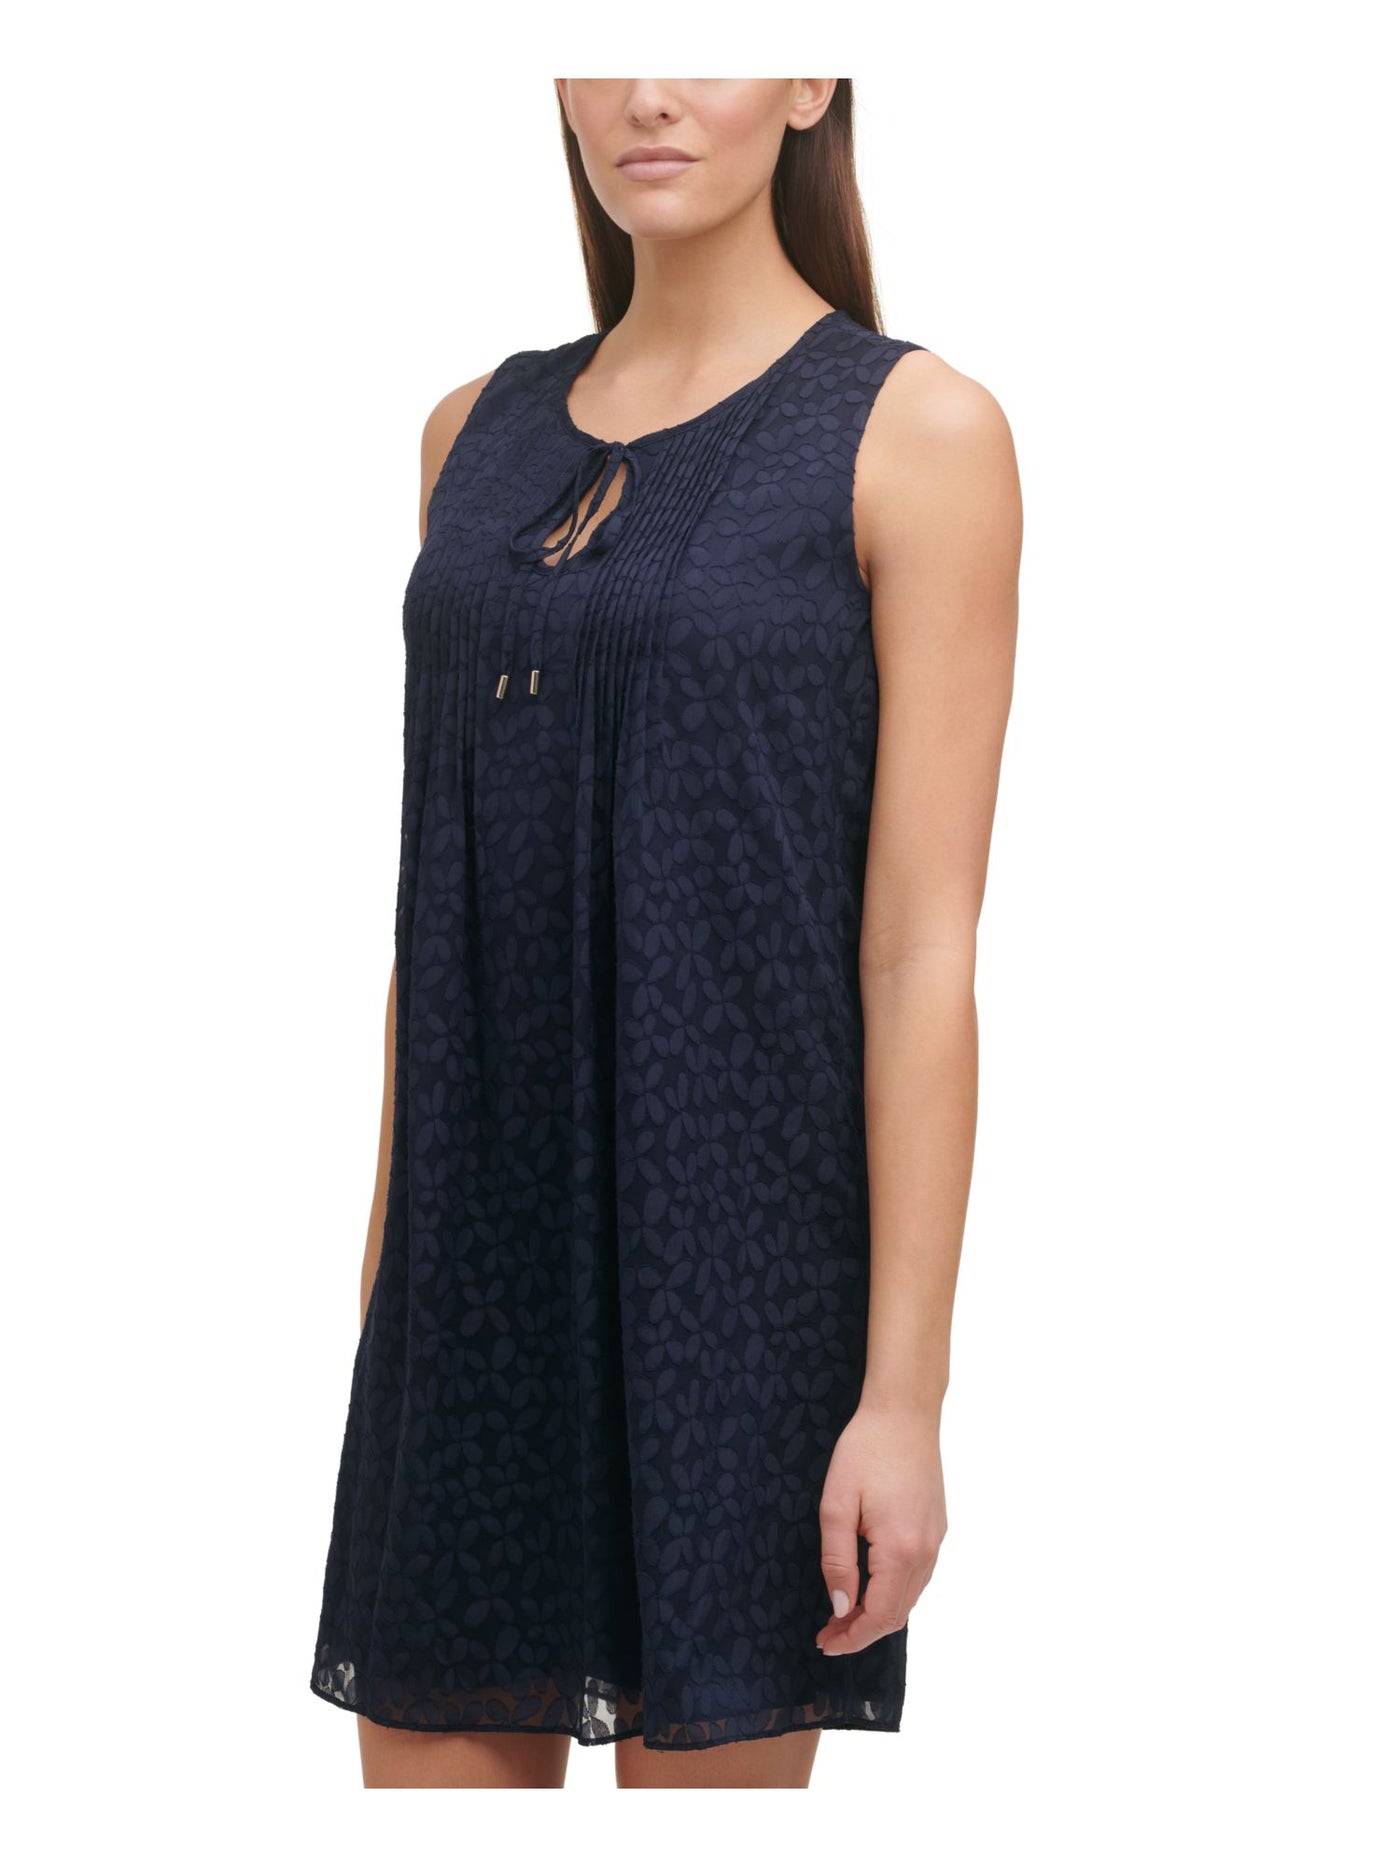 TOMMY HILFIGER Womens Navy Textured Pleated Lined Floral Sleeveless Keyhole Short Shift Dress 16